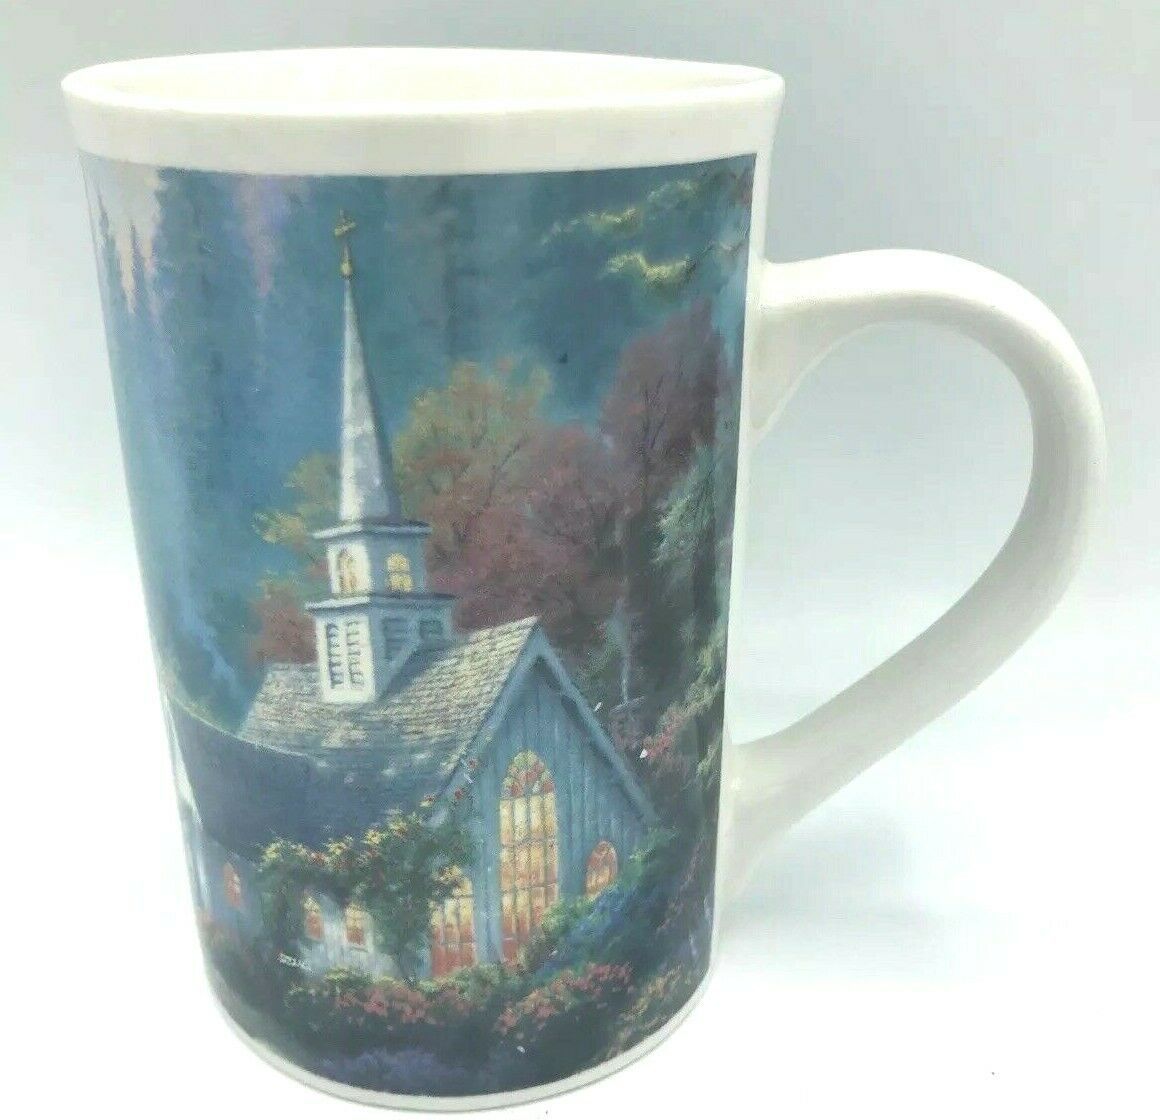 Primary image for Thomas Kincade The Forest Chapel 1999 Collectible Coffee Mug Cup Design Pac Inc